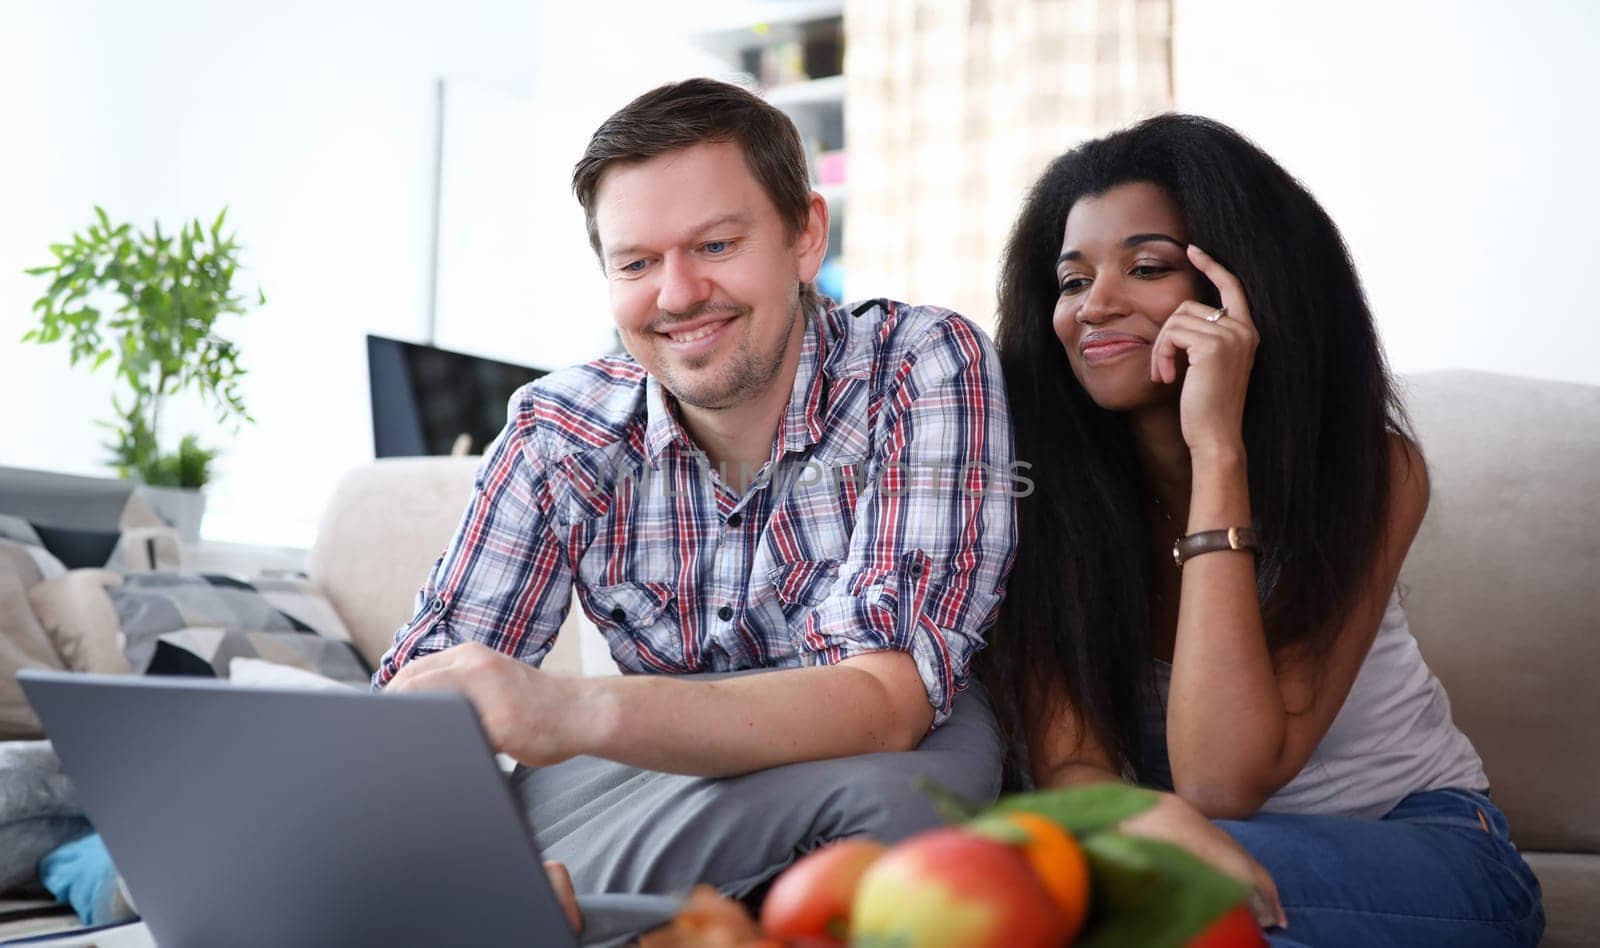 Portrait of smiling cute couple searching for information on laptop. Man and afro-american woman sitting on sofa in living room. Leisure together. Technology and love concept